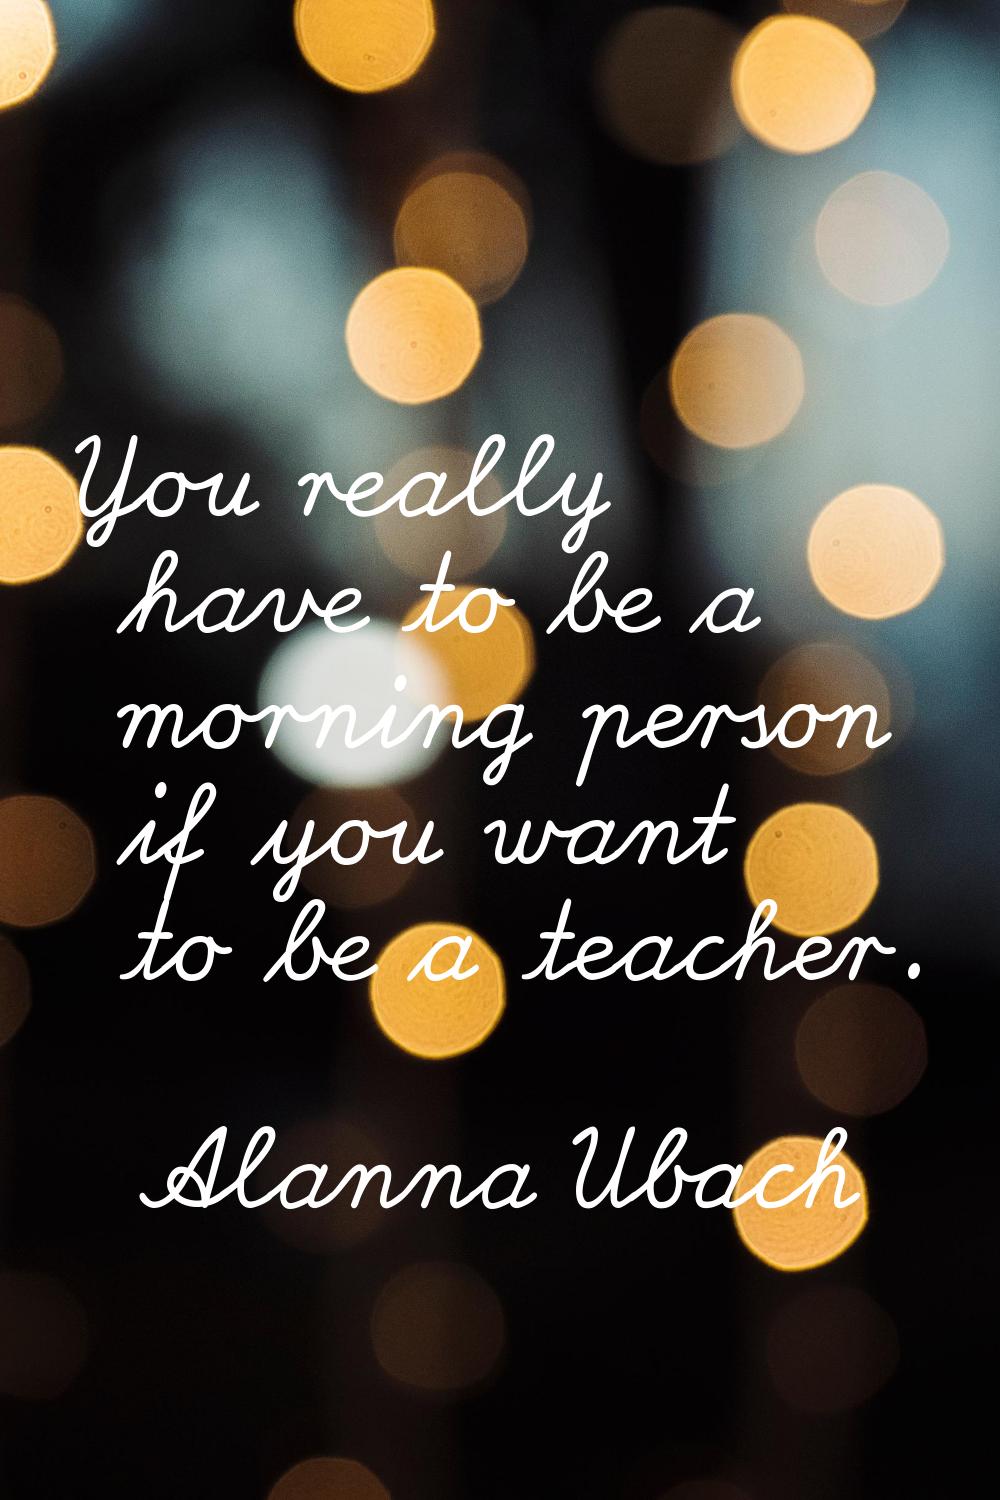 You really have to be a morning person if you want to be a teacher.